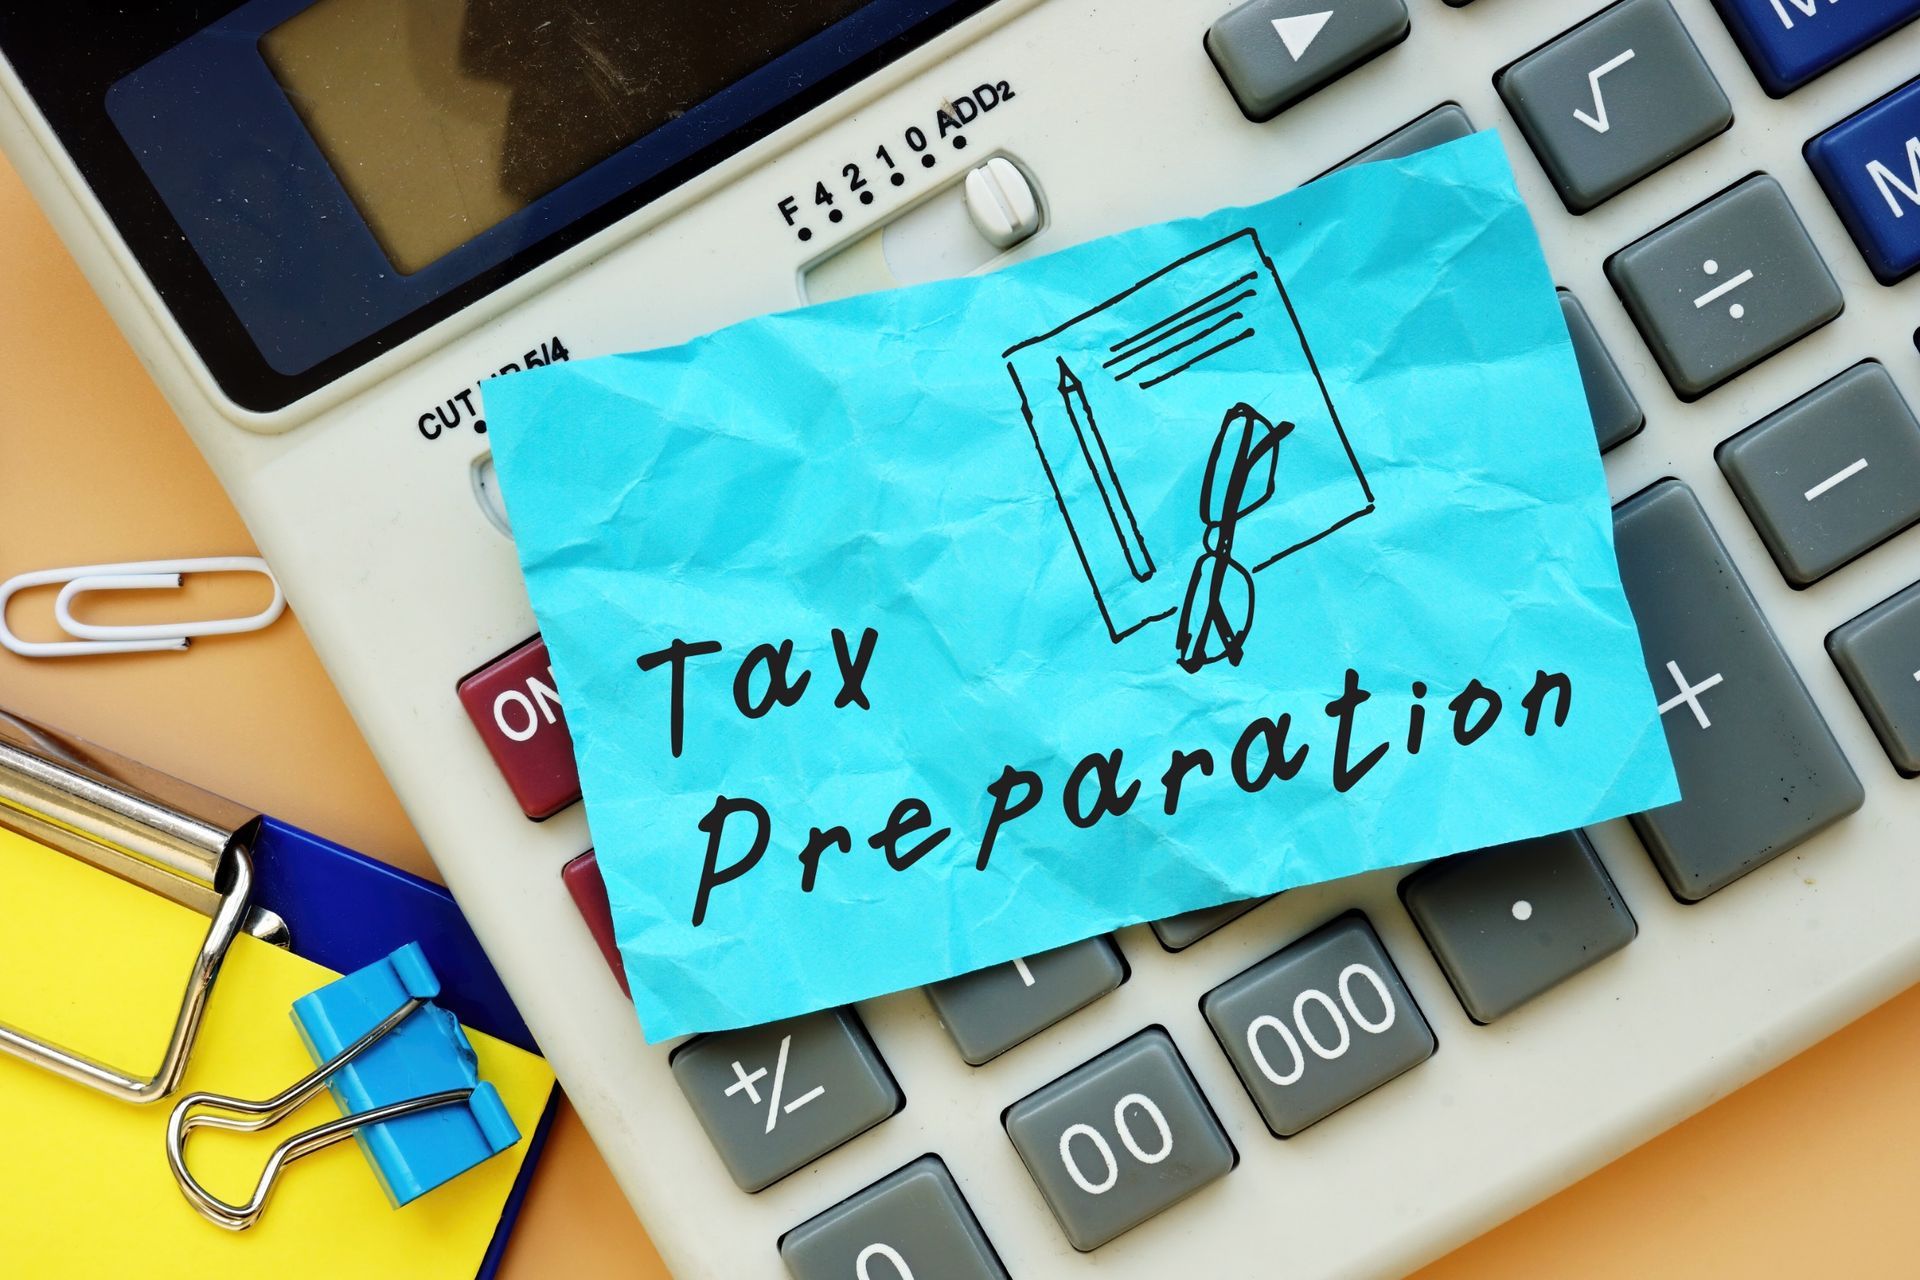 Questions To Ask When Choosing A Tax Preparer